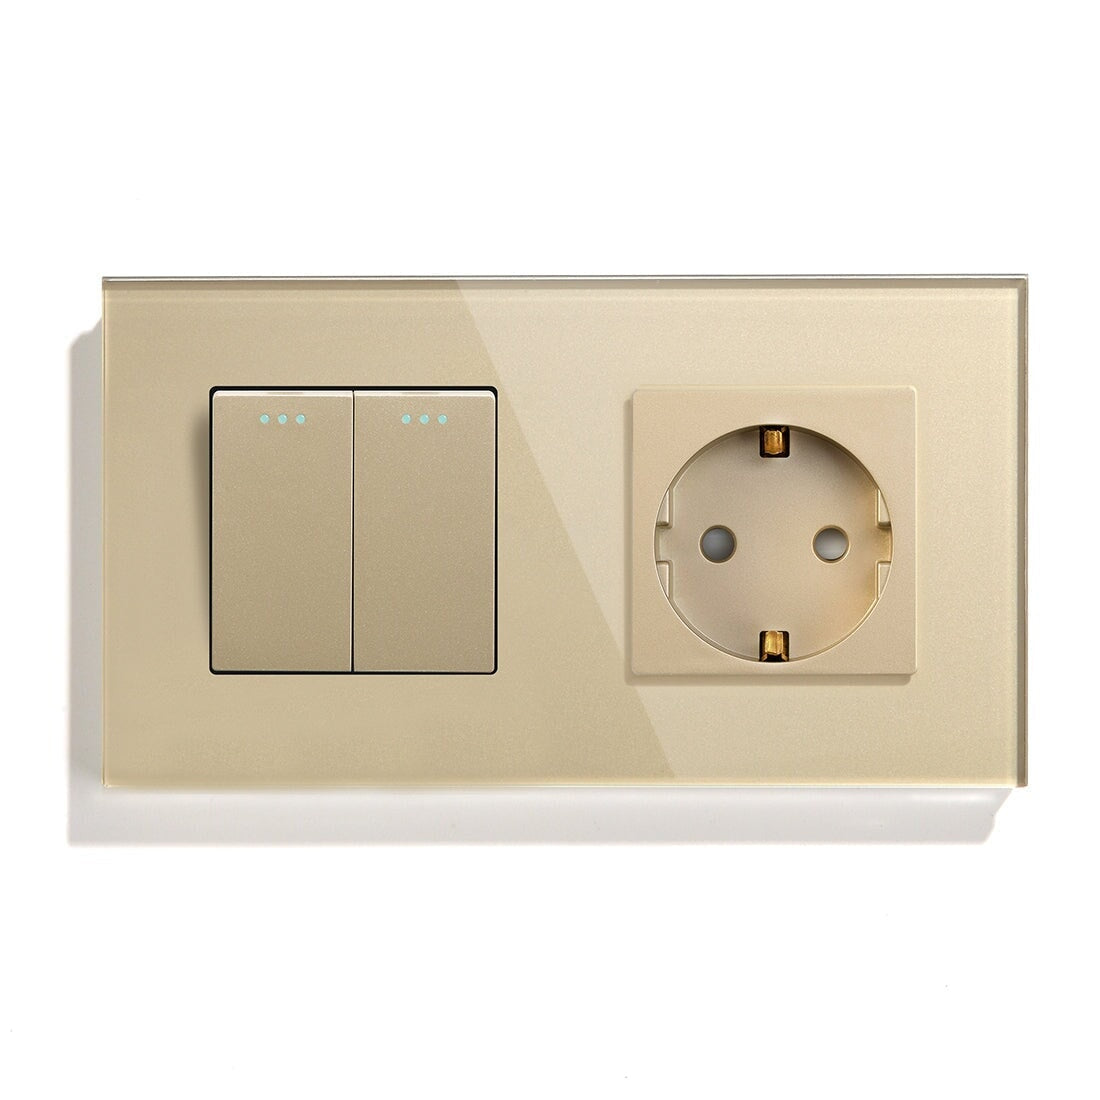 BSEED Mechanical 1/2/3 Gang 1/2Way Touch Light Switch With Normal Eu Socket with typcs-c Power Outlets & Sockets Bseedswitch Golden 2Gang 1Way